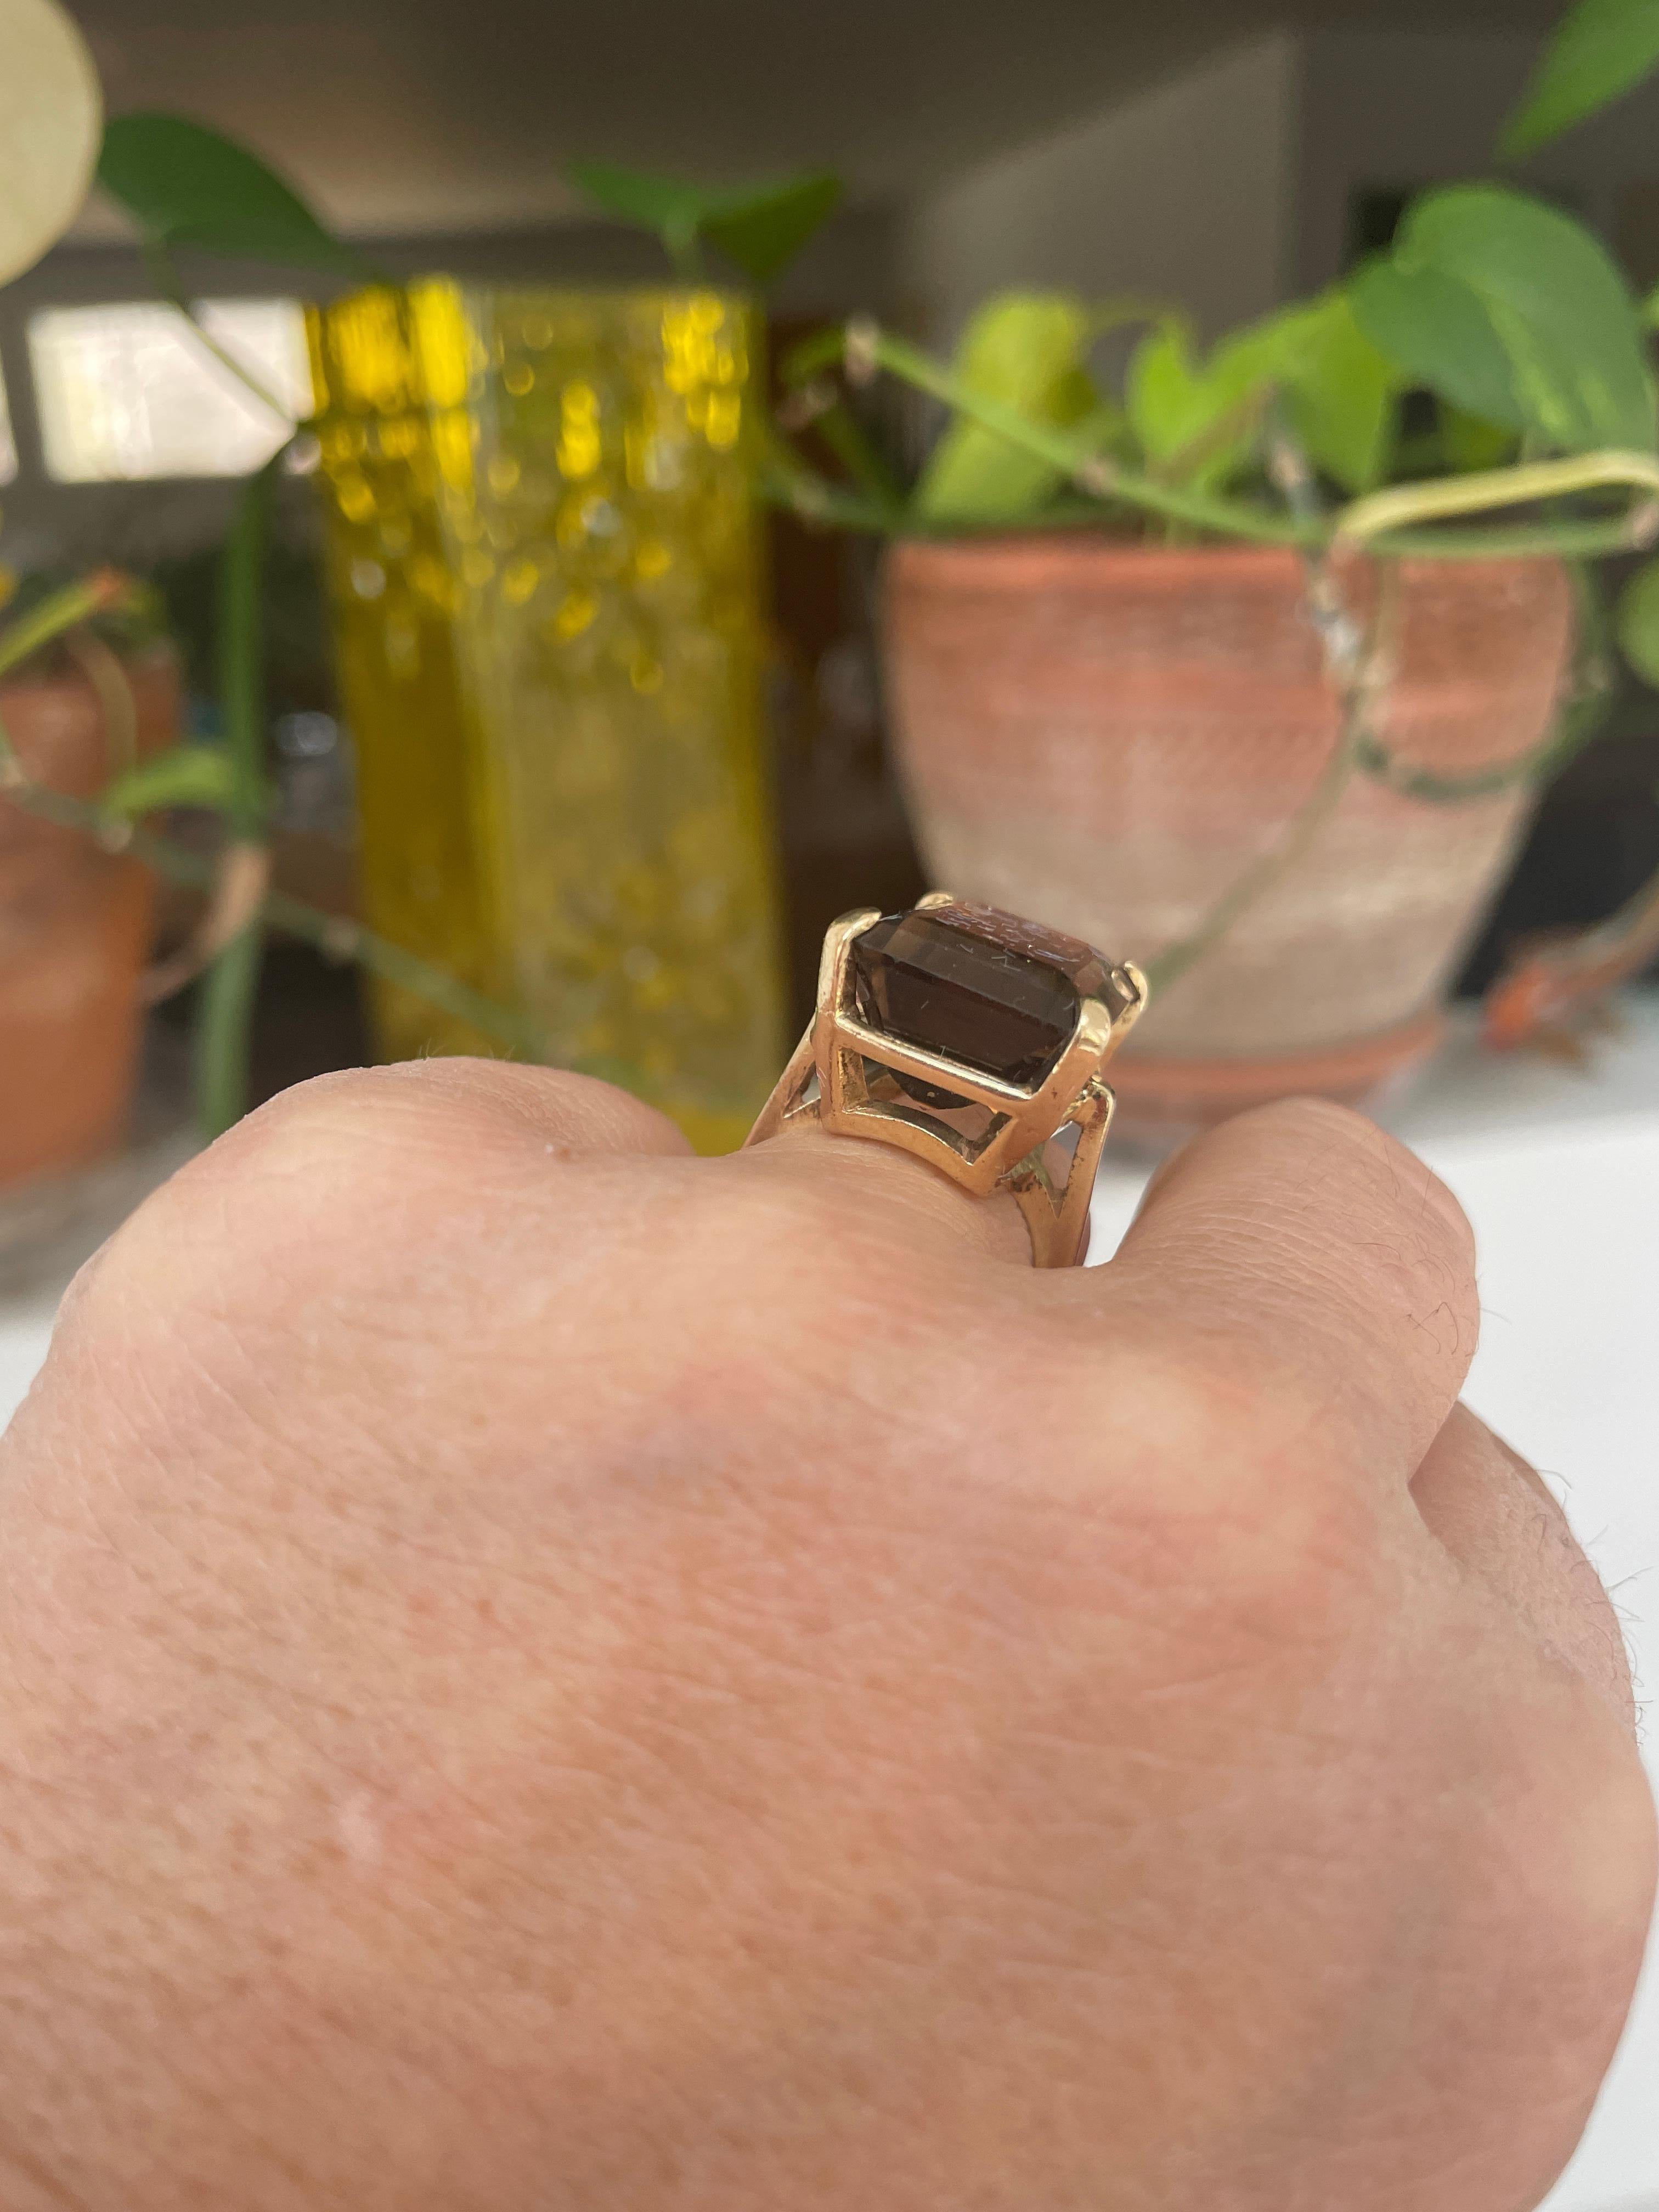 Smokey Quartz Emerald Cut 14 Karat Gold Ring 1960s 25 Carats In Excellent Condition For Sale In Wallkill, NY